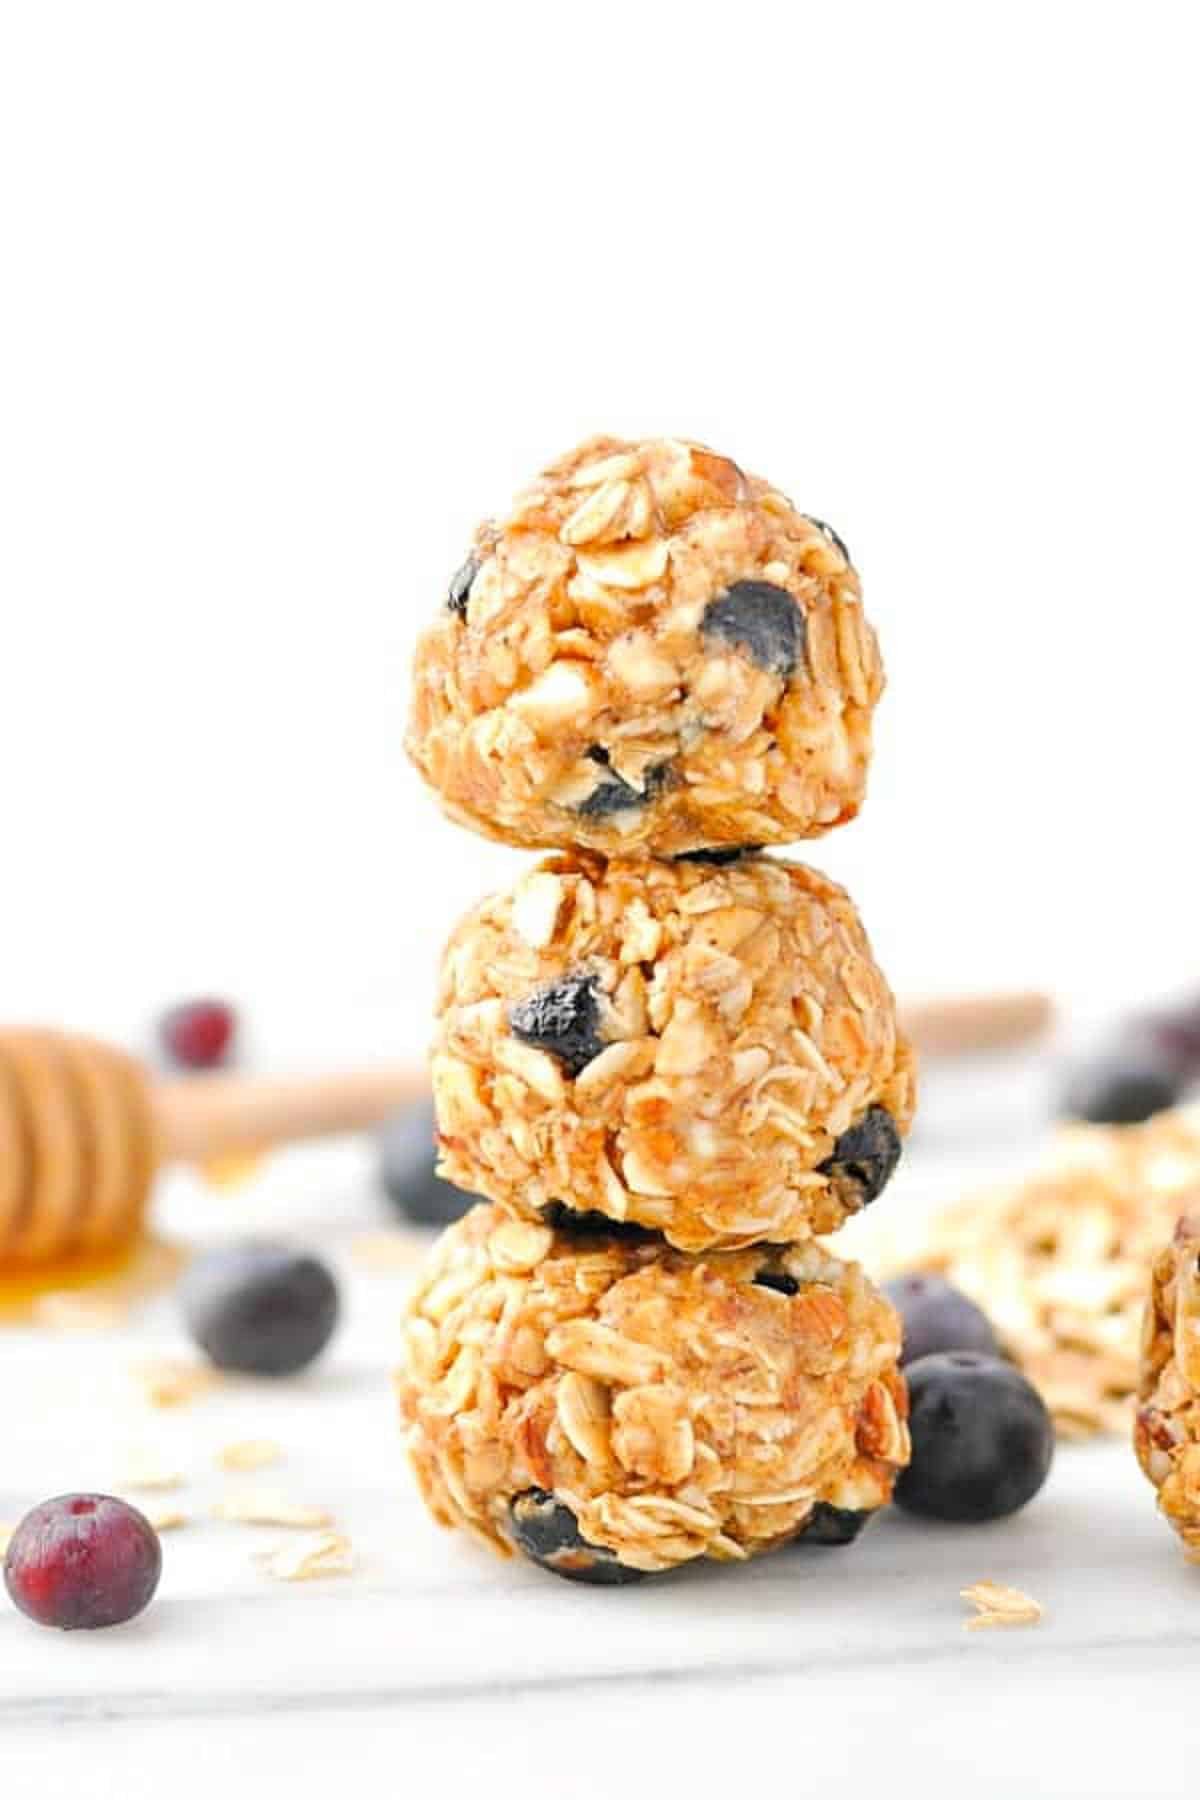 Three almond blueberry energy snacks stacked on top of each other.